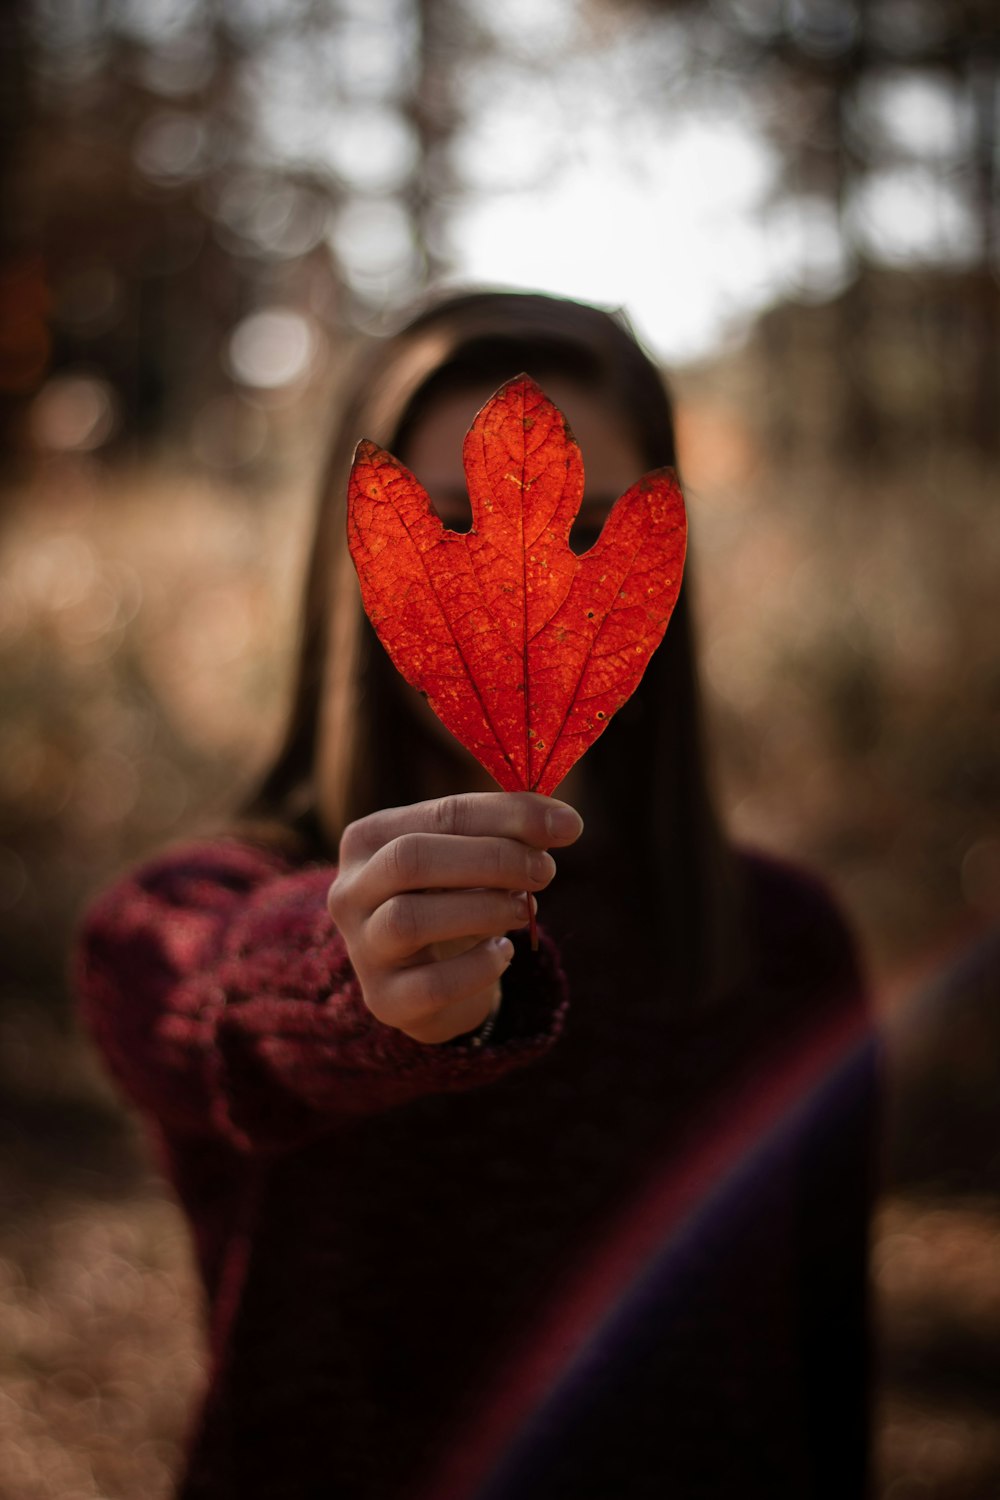 person holding red maple leaf